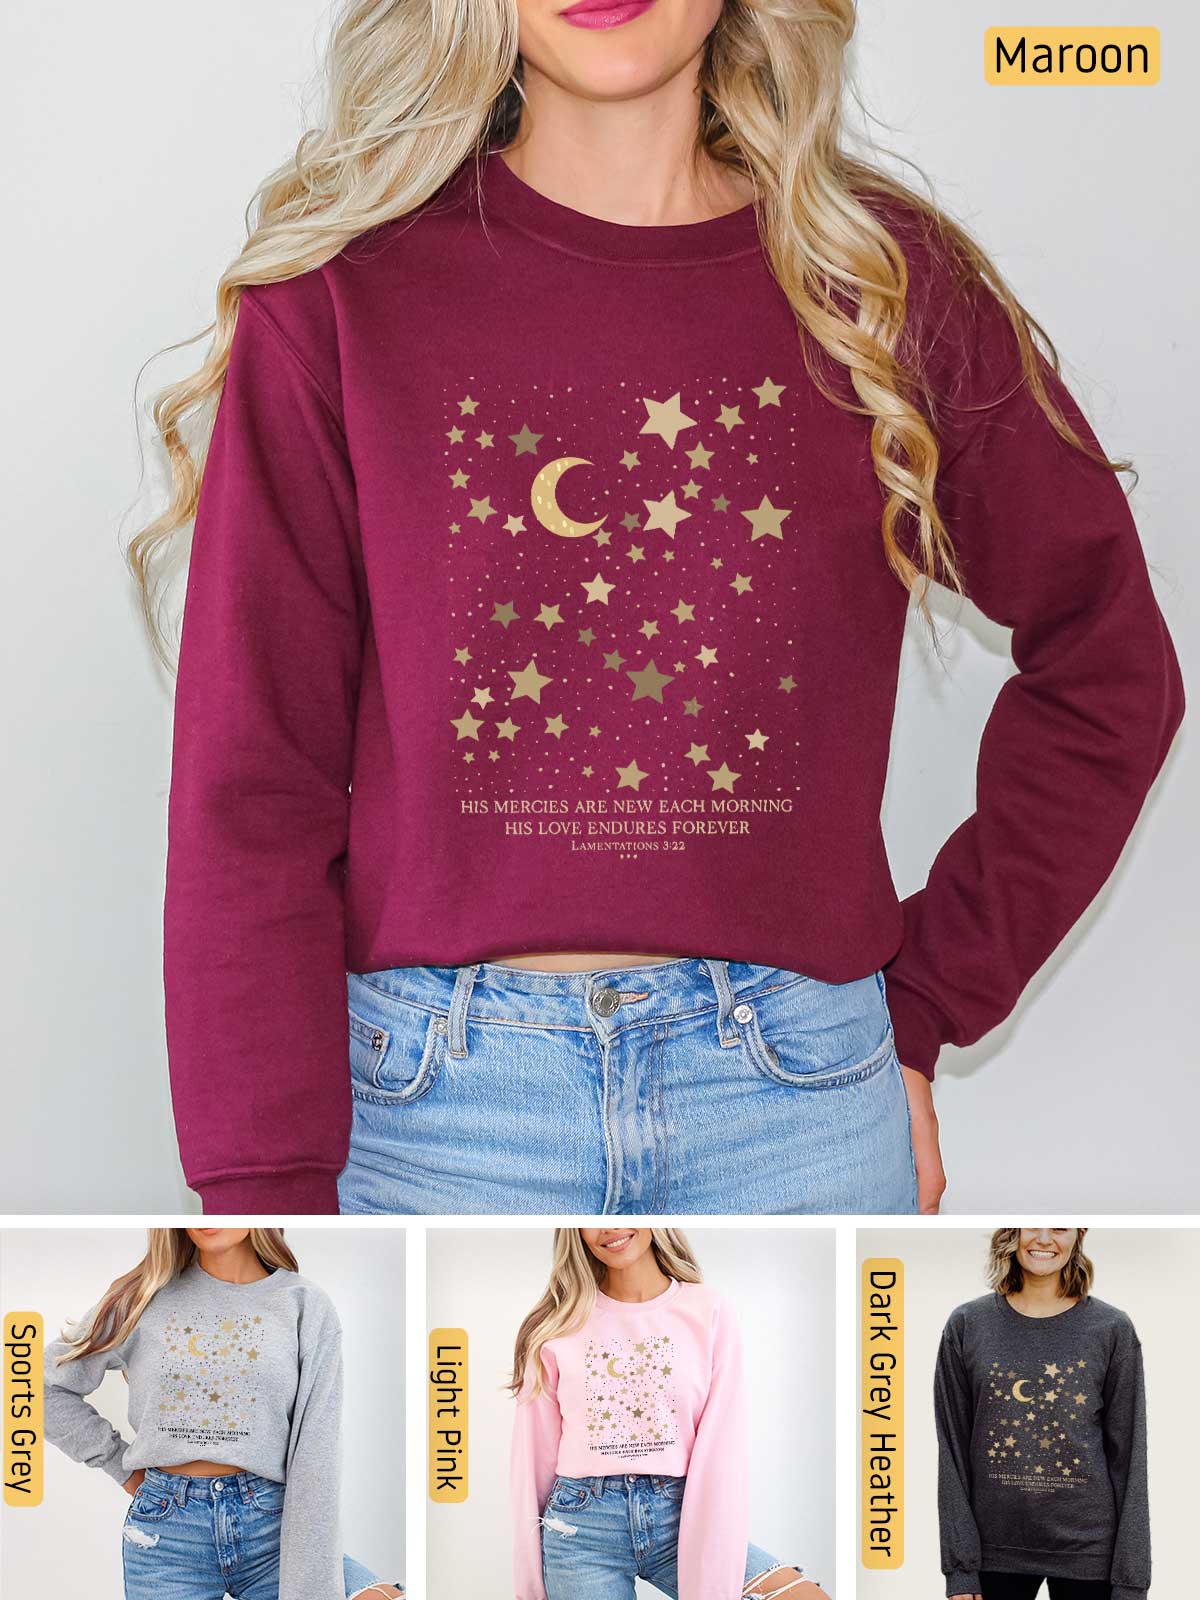 a woman wearing a sweatshirt with stars and moon on it